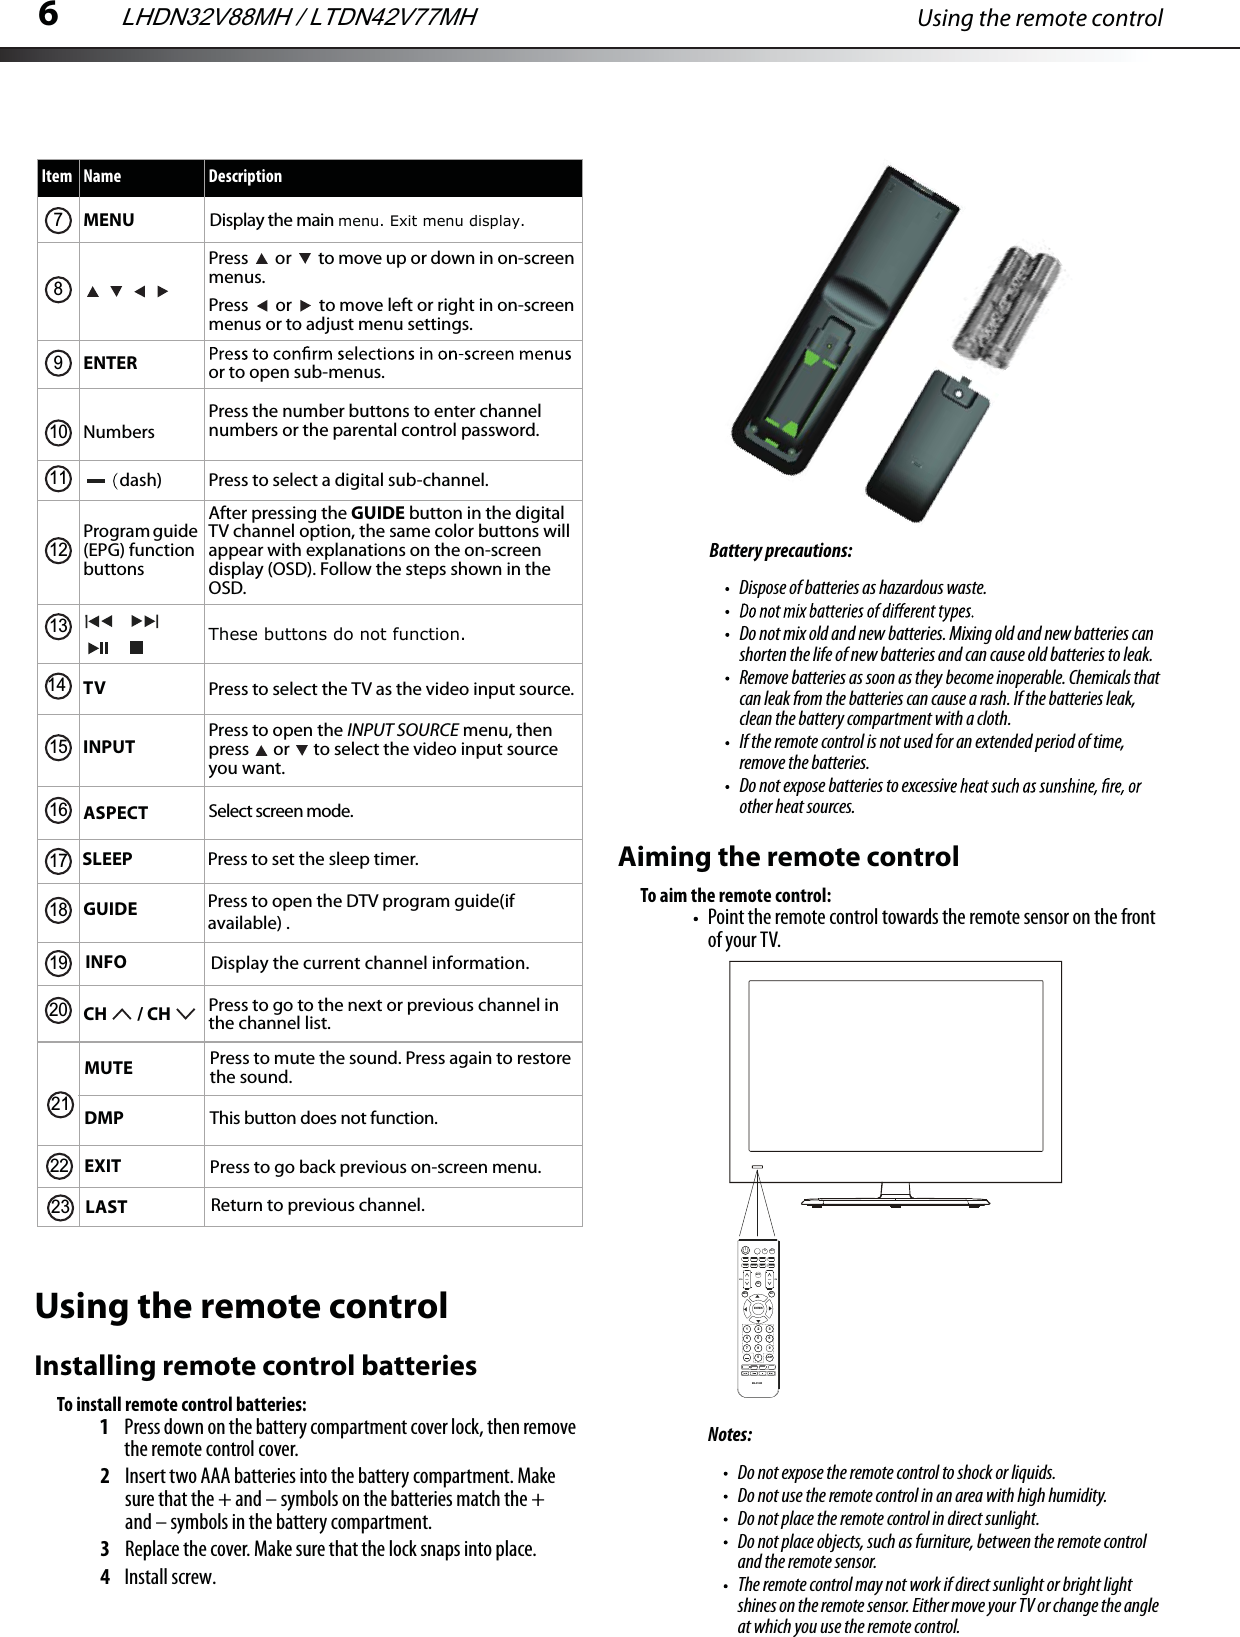 6Using the remote controlUsing the remote controlInstalling remote control batteriesTo install remote control batteries:1Press down on the battery compartment cover lock, then remove the remote control cover.2Insert two AAA batteries into the battery compartment. Make sure that the + and – symbols on the batteries match the + and – symbols in the battery compartment.3Replace the cover. Make sure that the lock snaps into place.4 Install screw.Battery precautions: Dispose of batteries as hazardous waste.Do not mix old and new batteries. Mixing old and new batteries can shorten the life of new batteries and can cause old batteries to leak.Remove batteries as soon as they become inoperable. Chemicals that can leak from the batteries can cause a rash. If the batteries leak, clean the battery compartment with a cloth.If the remote control is not used for an extended period of time, remove the batteries.Do not expose batteries to excessivother heat sources.MENU Display the main menu. Exit menu display.Press   or   to move up or down in on-screen menus.Press   or   to move left or right in on-screen menus or to adjust menu settings.ENTER or to open sub-menus.Numbersdash)Press the number buttons to enter channel numbers or the parental control password.Press to select a digital sub-channel.Program guide (EPG) function buttonsAfter pressing the GUIDE button in the digital TV channel option, the same color buttons will appear with explanations on the on-screen display (OSD). Follow the steps shown in the OSD.These buttons do not function.TV Press to select the TV as the video input source. Select screen mode.INPUTPress to open the INPUT SOURCE menu, then press   or   to select the video input source you want.ASPECTGUIDECH  / CH Press to go to the next or previous channel in the channel list.Item Name Description7891011121314151617181920INFO Display the current channel information.MUTEDMPPress to mute the sound. Press again to restore This button does not function.the sound.EXITPress to go back previous on-screen menu.LAST Return to previous channel.SLEEPPress to set the sleep timer. Press to open the DTV program guide(if available) . 212223Aiming the remote controlTo aim the remote control:Point the remote control towards the remote sensor on the front of your TV.Notes:Do not expose the remote control to shock or liquids.Do not use the remote control in an area with high humidity.Do not place the remote control in direct sunlight.Do not place objects, such as furniture, between the remote control and the remote sensor.The remote control may not work if direct sunlight or bright light shines on the remote sensor. Either move your TV or change the angle at which you use the remote control.INPUTENTER7   8  0  EN-31205ASPECTGUIDEINFOMENUCHVOLDMPCCDMTS/SAPSLEEPSOUNDEXITTV1   23  5   6  4  7   8   9  0  LASTPICTUREMUTELHDN32V88MH / LTDN42V77MH